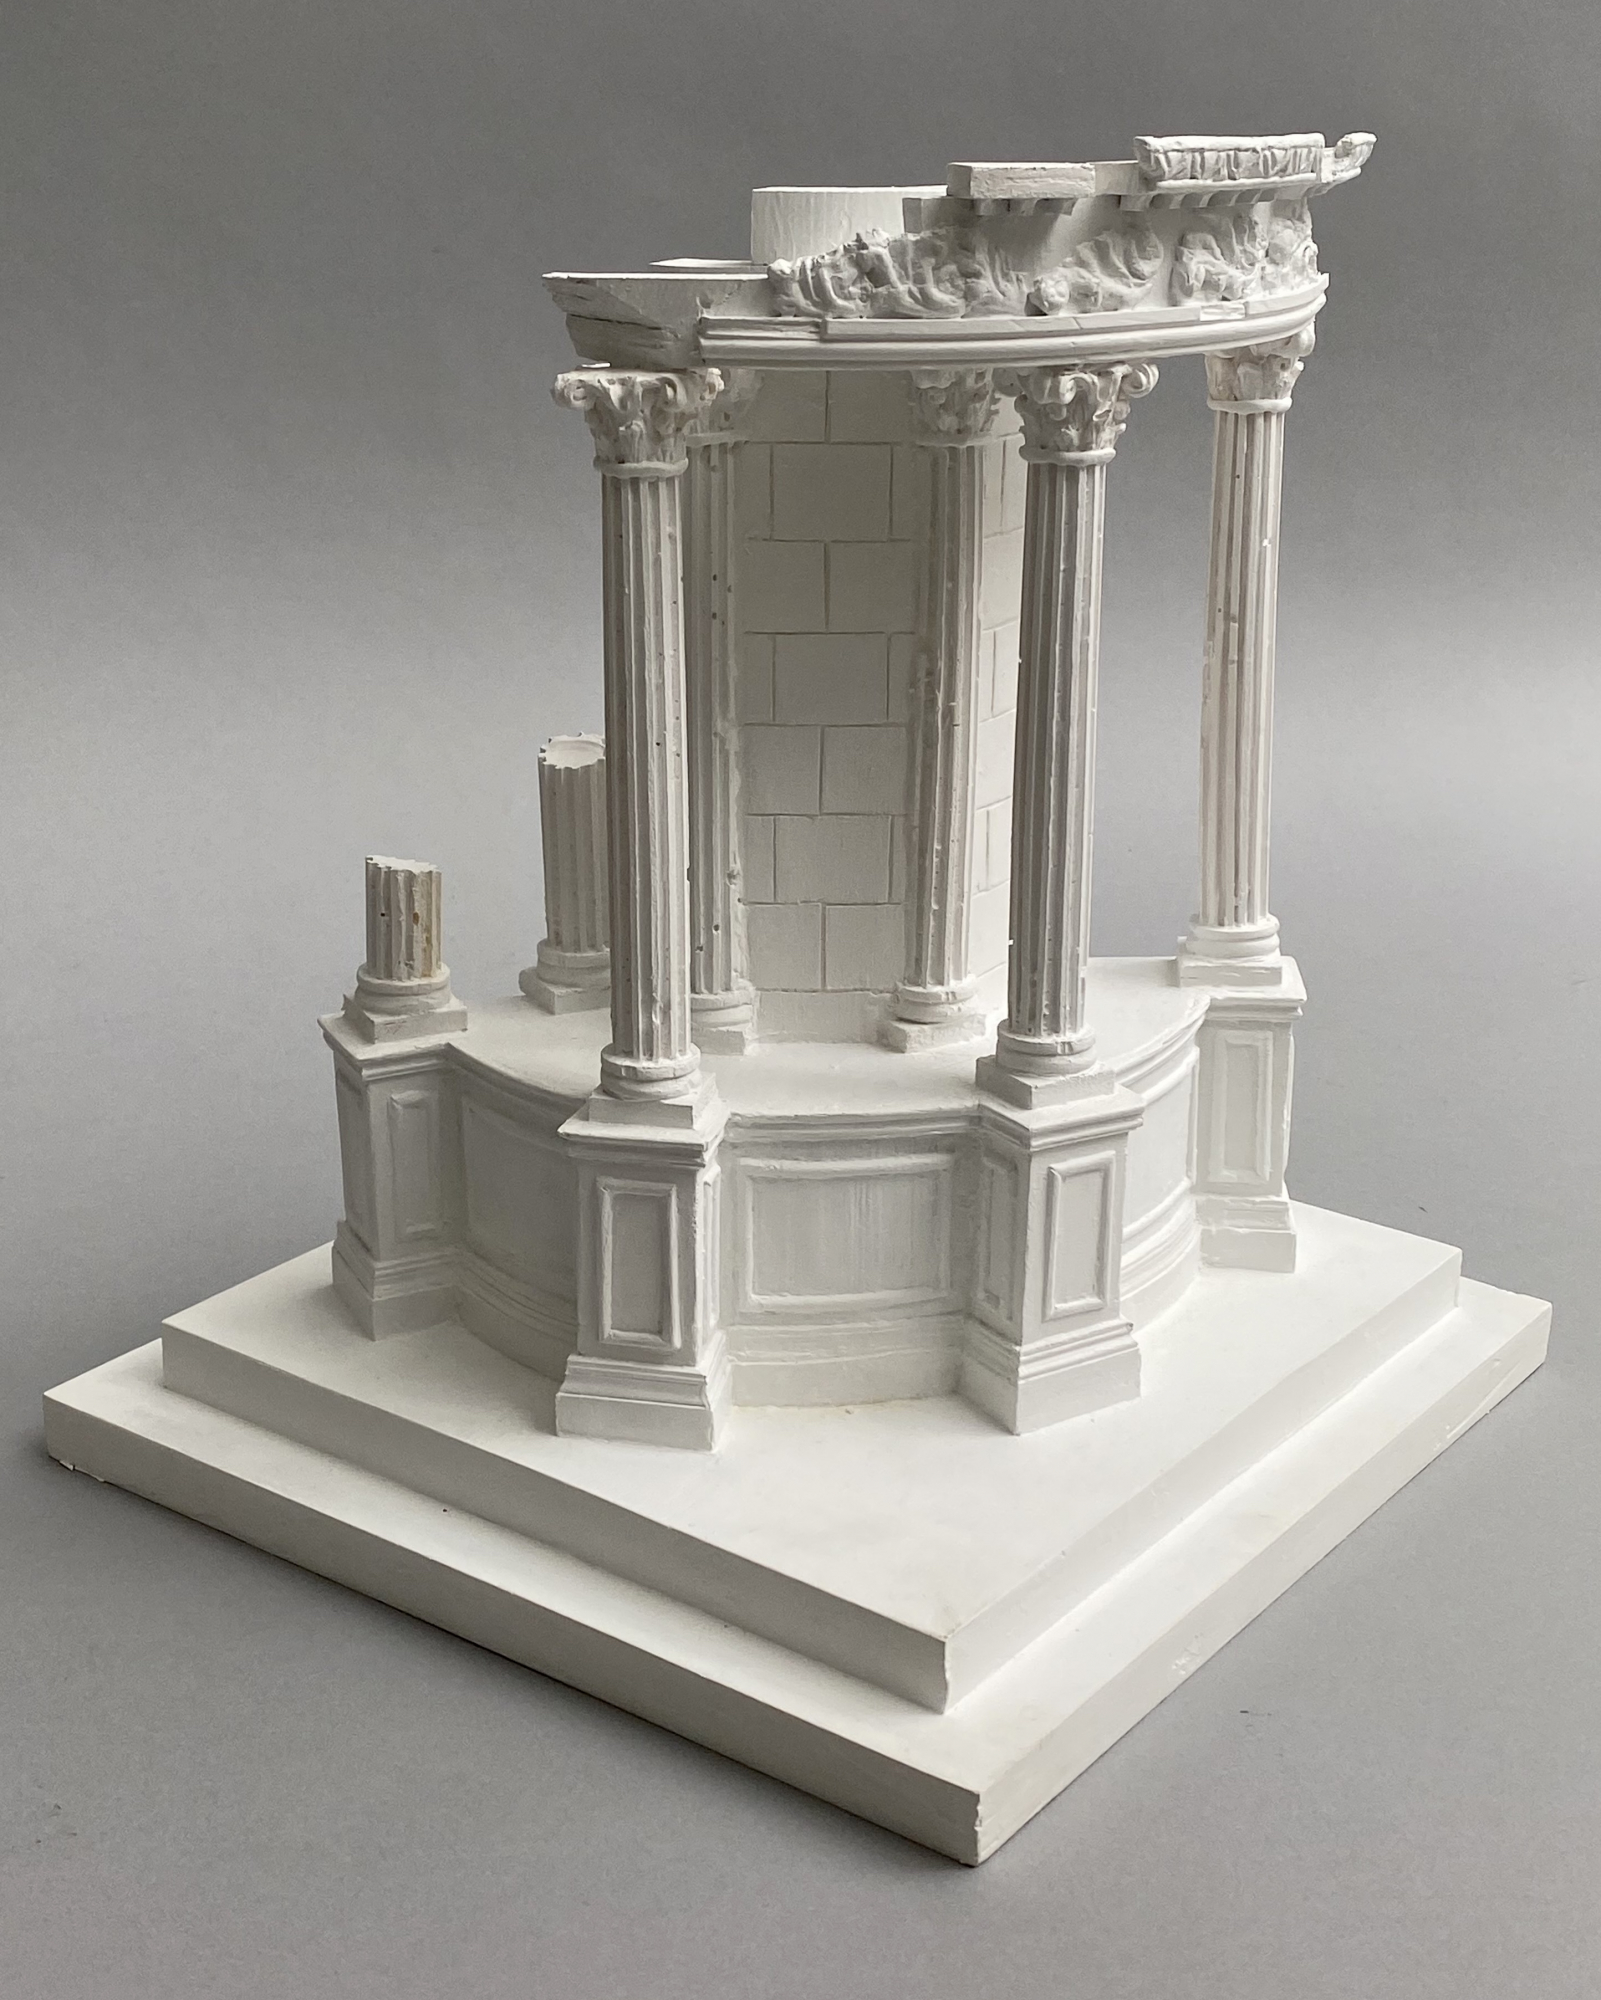 Details about   1/87 HO Scale Building Temple of Vesta Tivoli Italy 3D Cardboard Model Kit New 